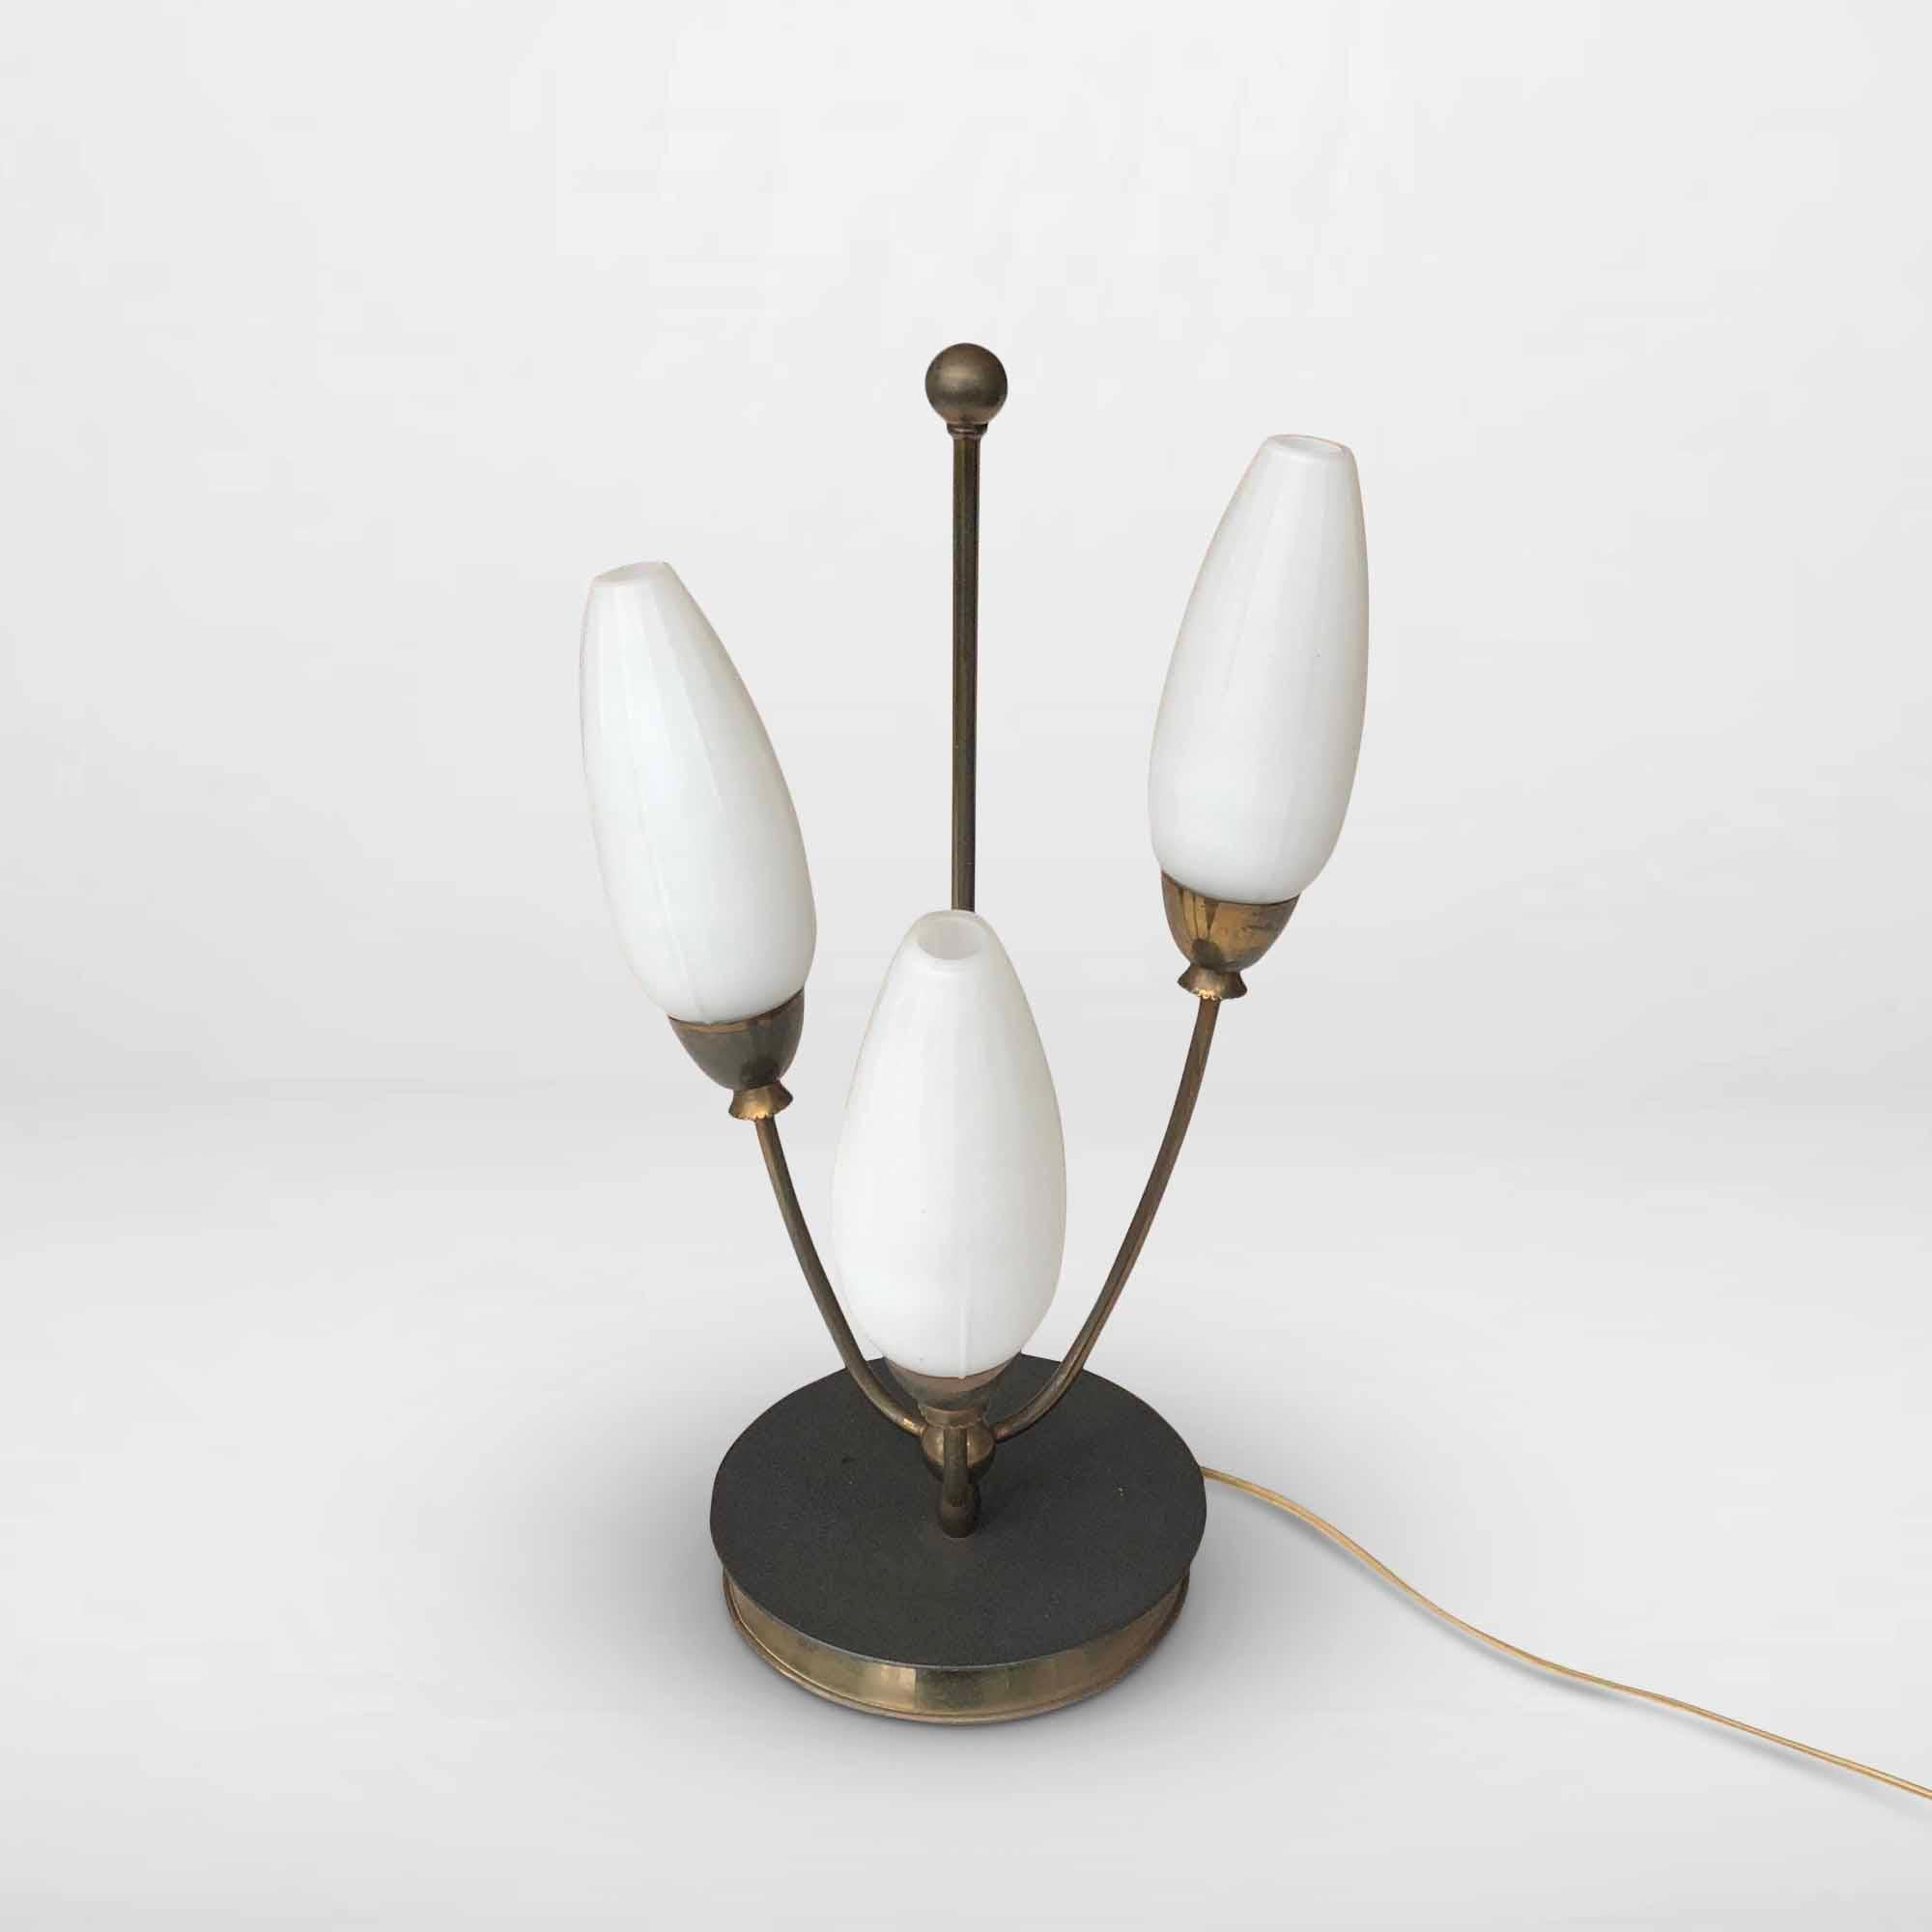 Unique vintage table lamp with a round brass base, 3 curved brass rods, and white frosted opal oval/convex glass lampshades. Light bulbs: 3 x E14 max 60 watts. The lamp has been rewired.

Designer/Manufacturer: Unknown for Massive, Belgium

Belgium,